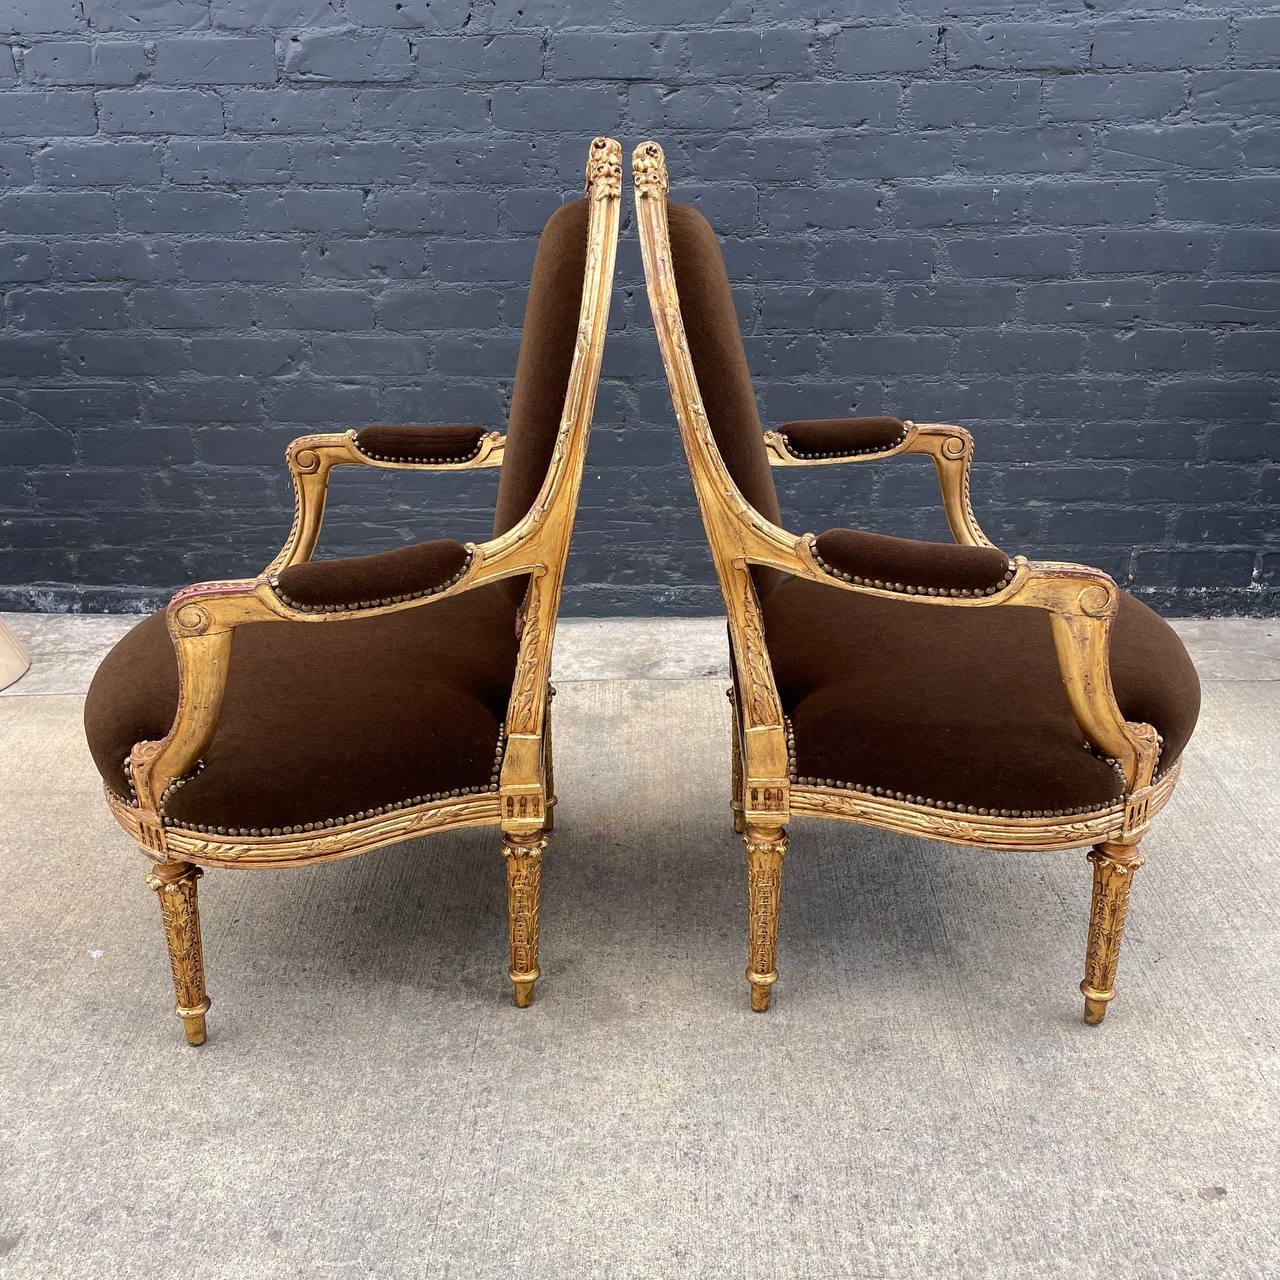 Early 20th Century Pair of French Neoclassical-Style Giltwood Armchairs For Sale